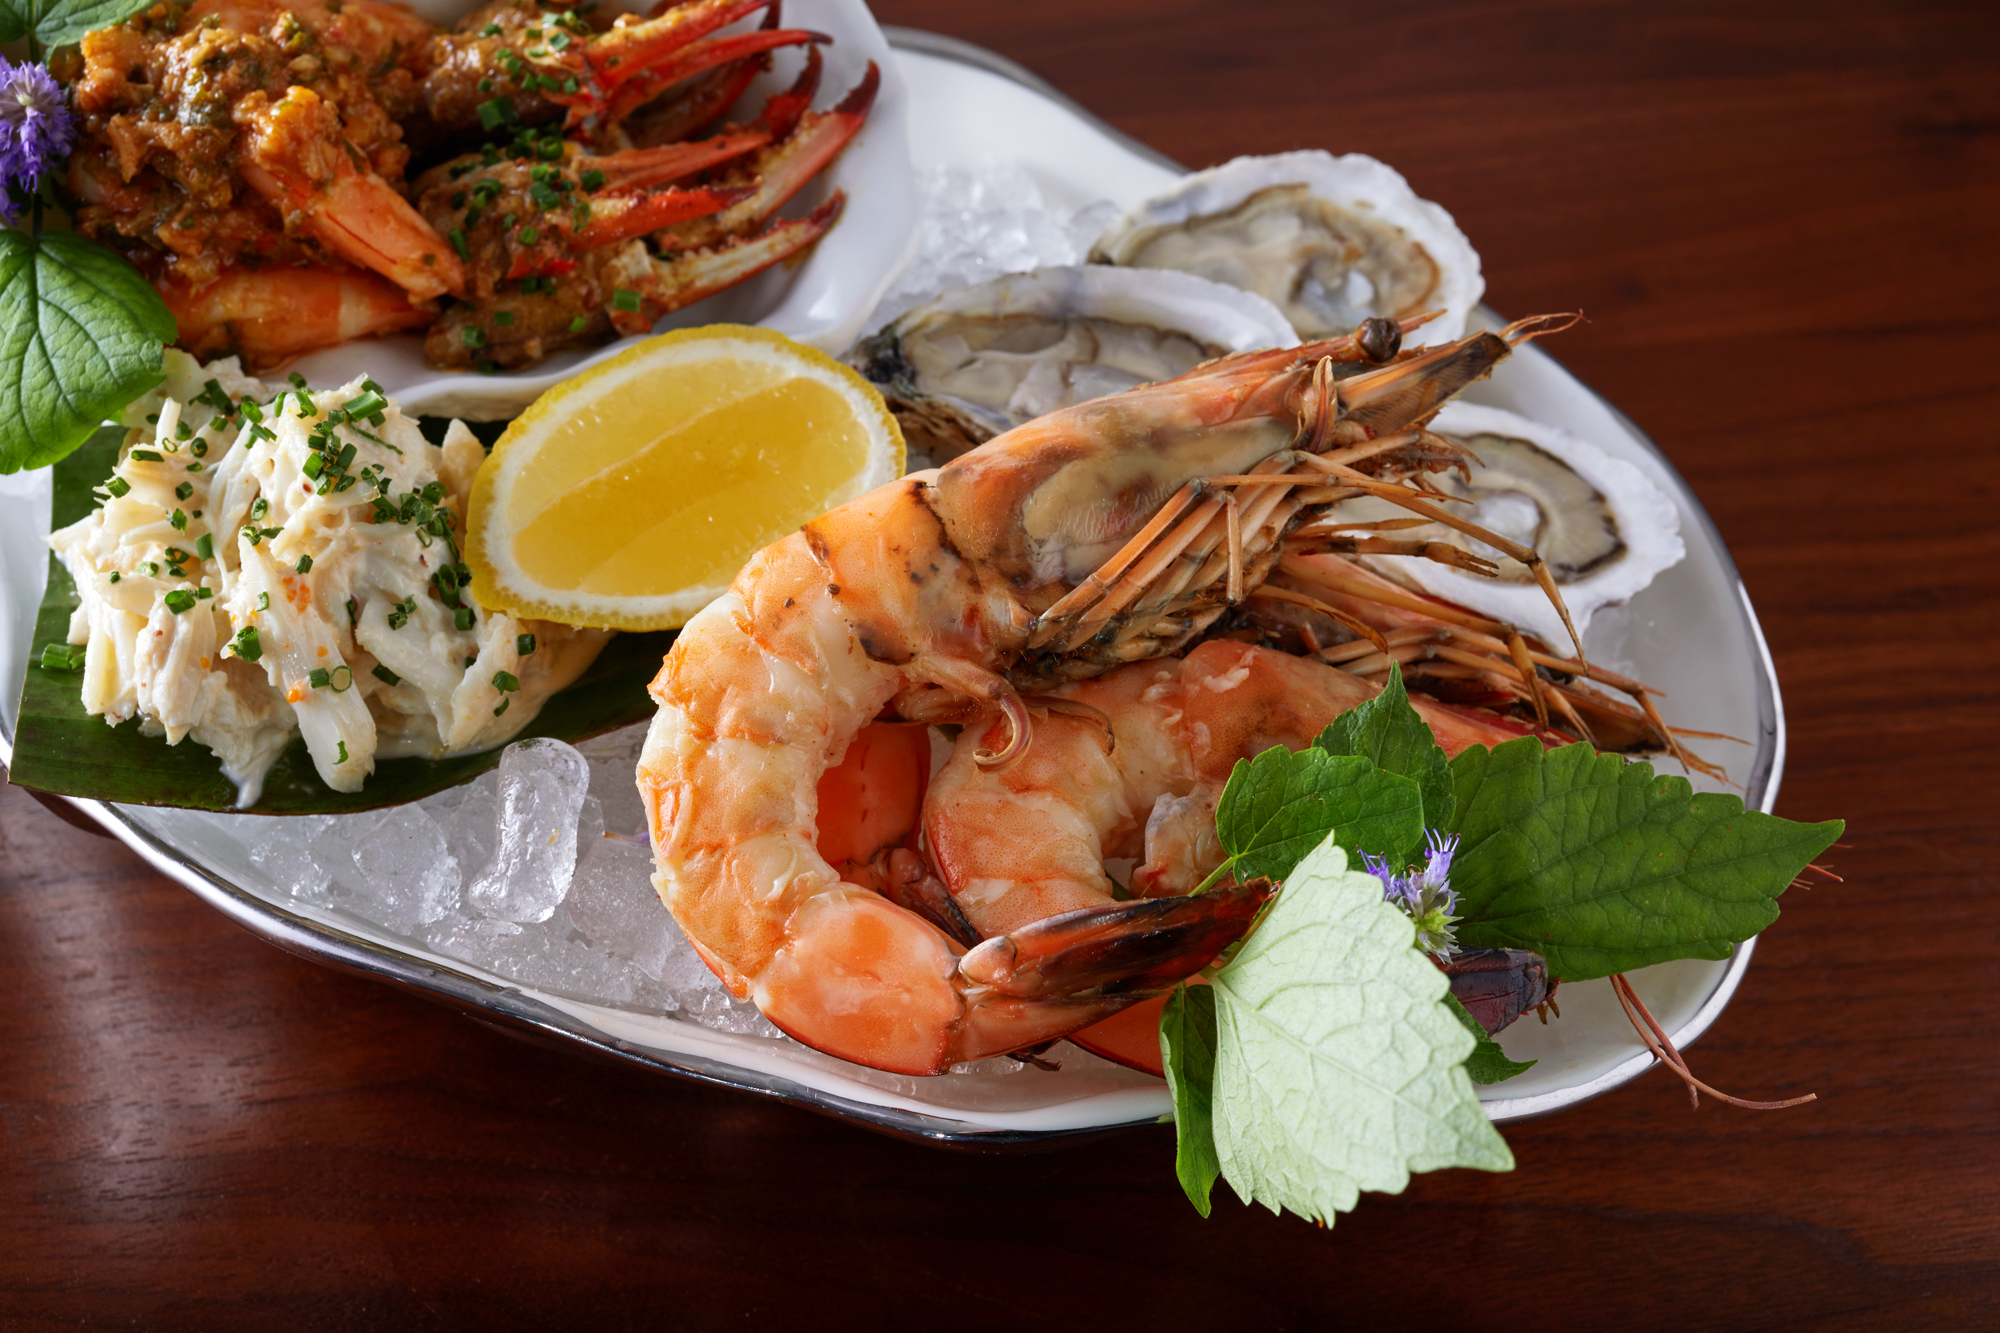 A silver platter topped with crushed ice holding a mix of large steamed prawns, crab claws, oysters on the half shell, and smoked fish dip.